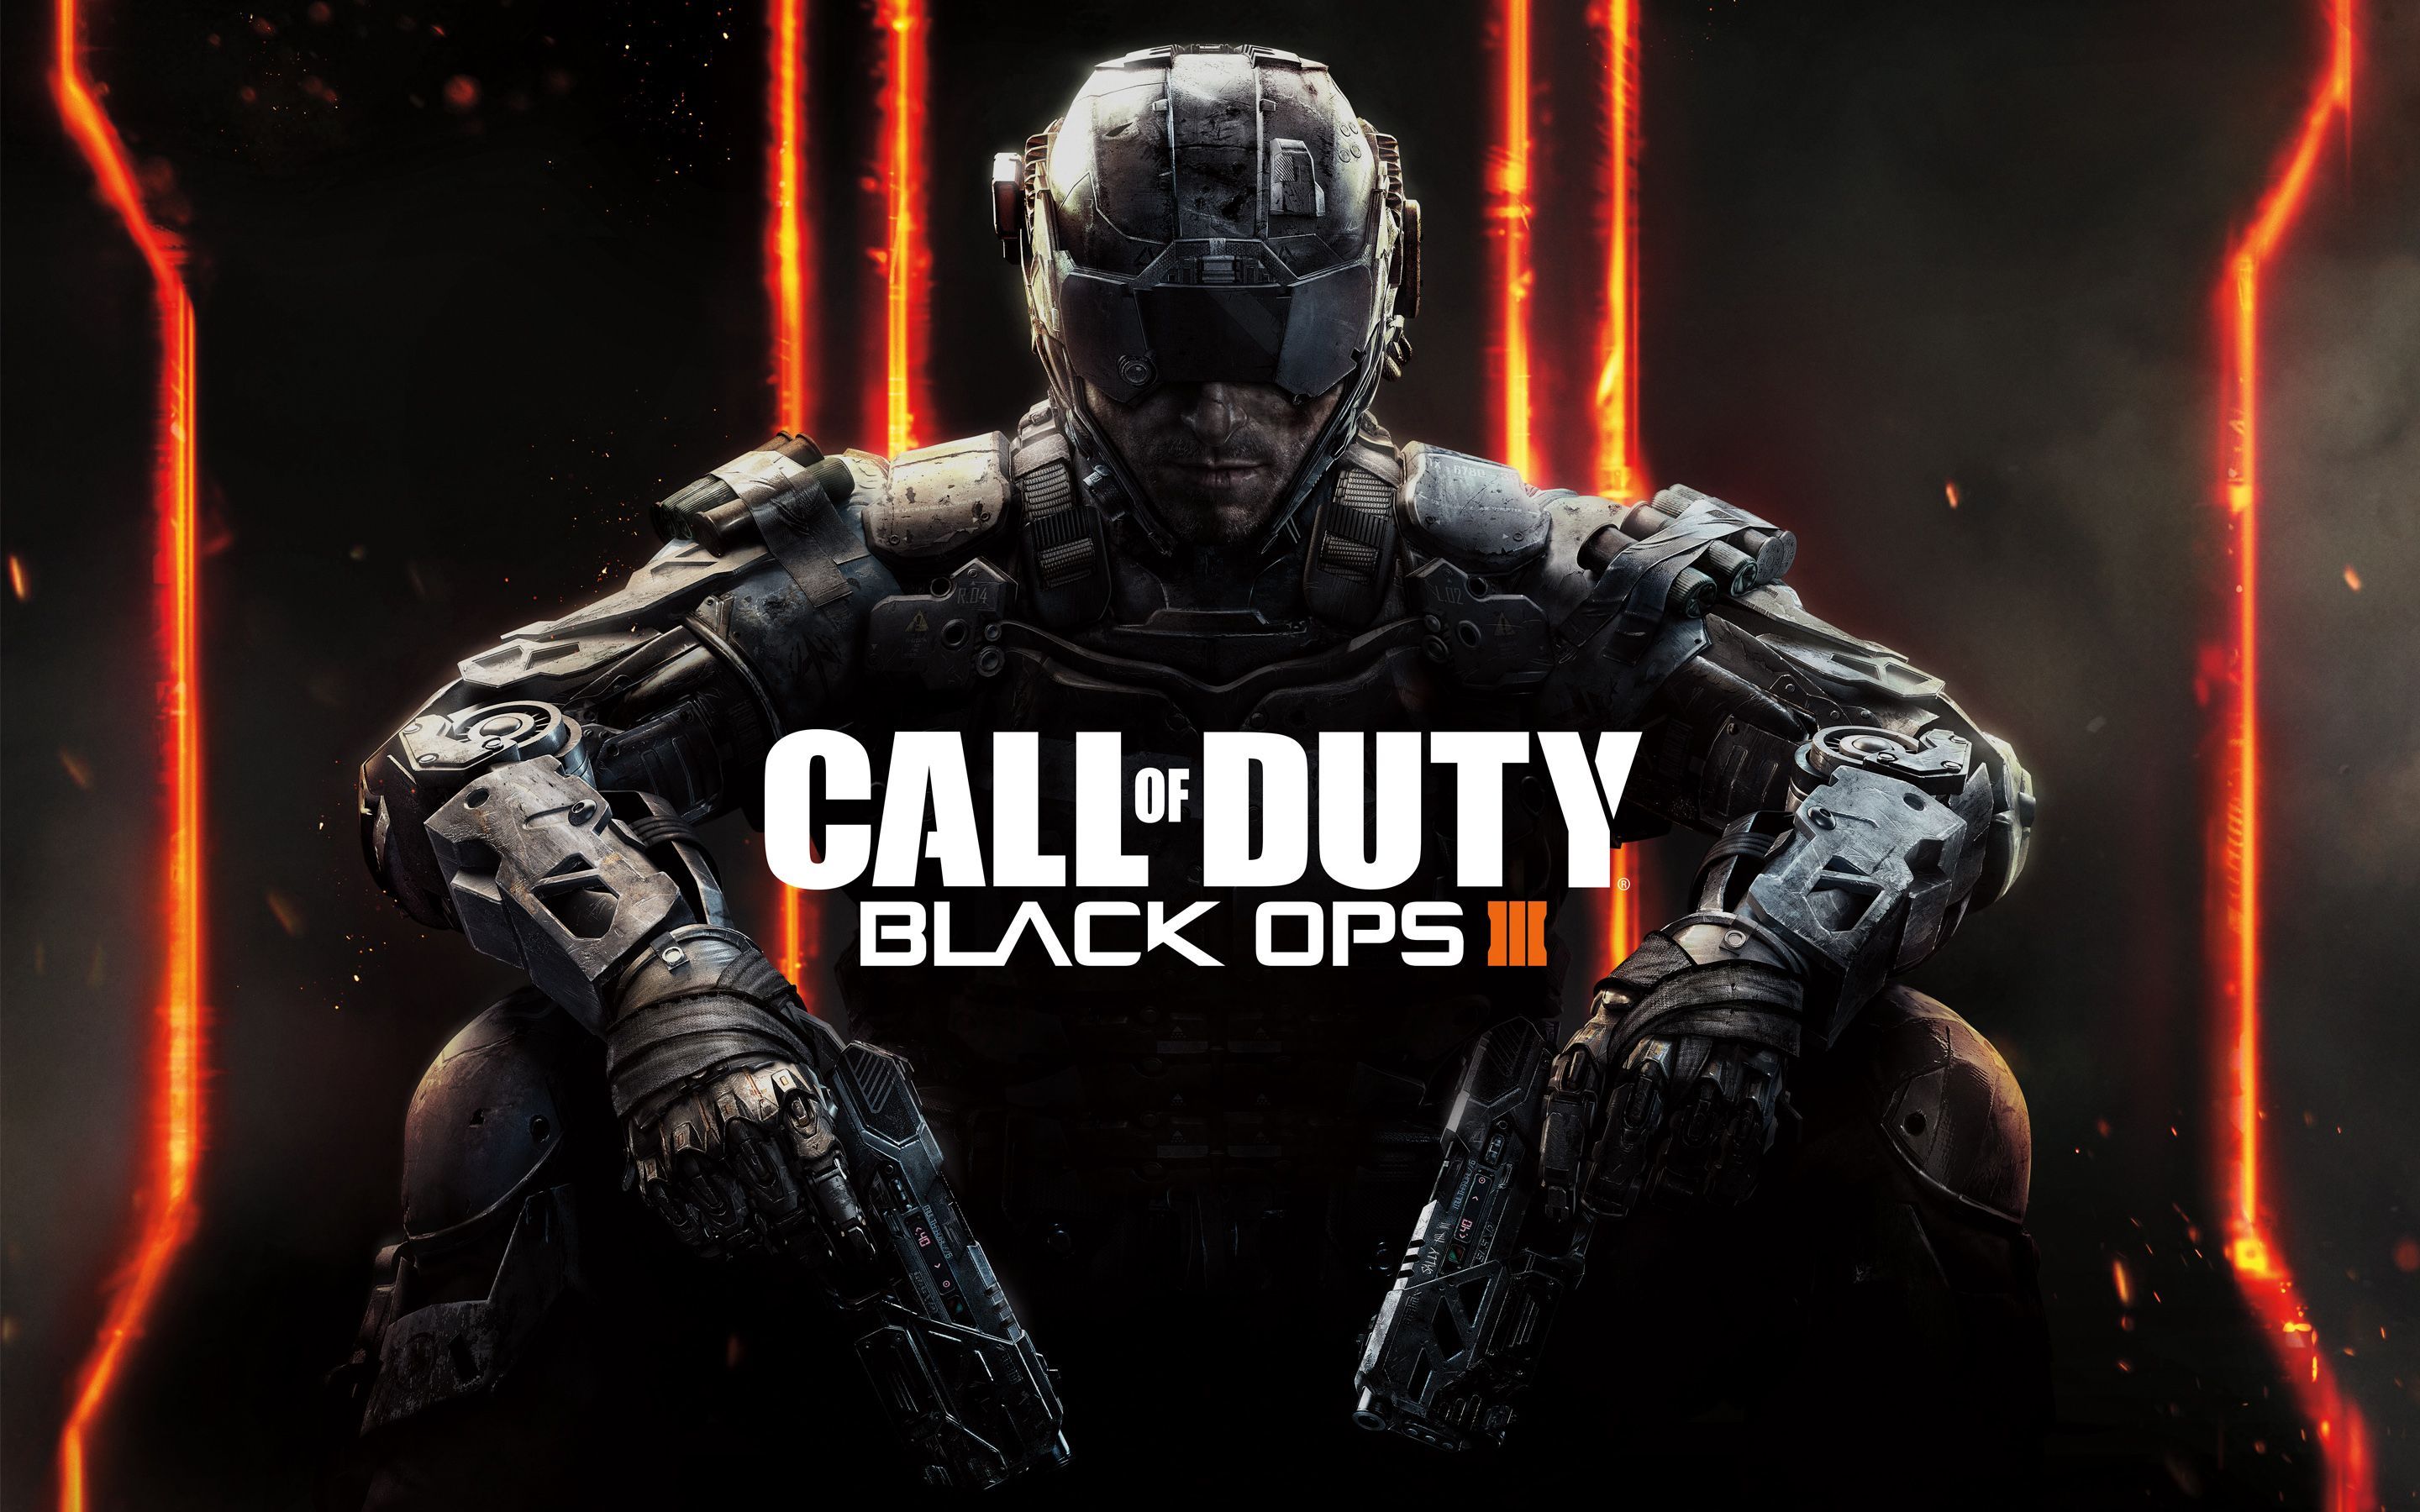 Call of Duty Black Ops III Wallpapers | HD Wallpapers